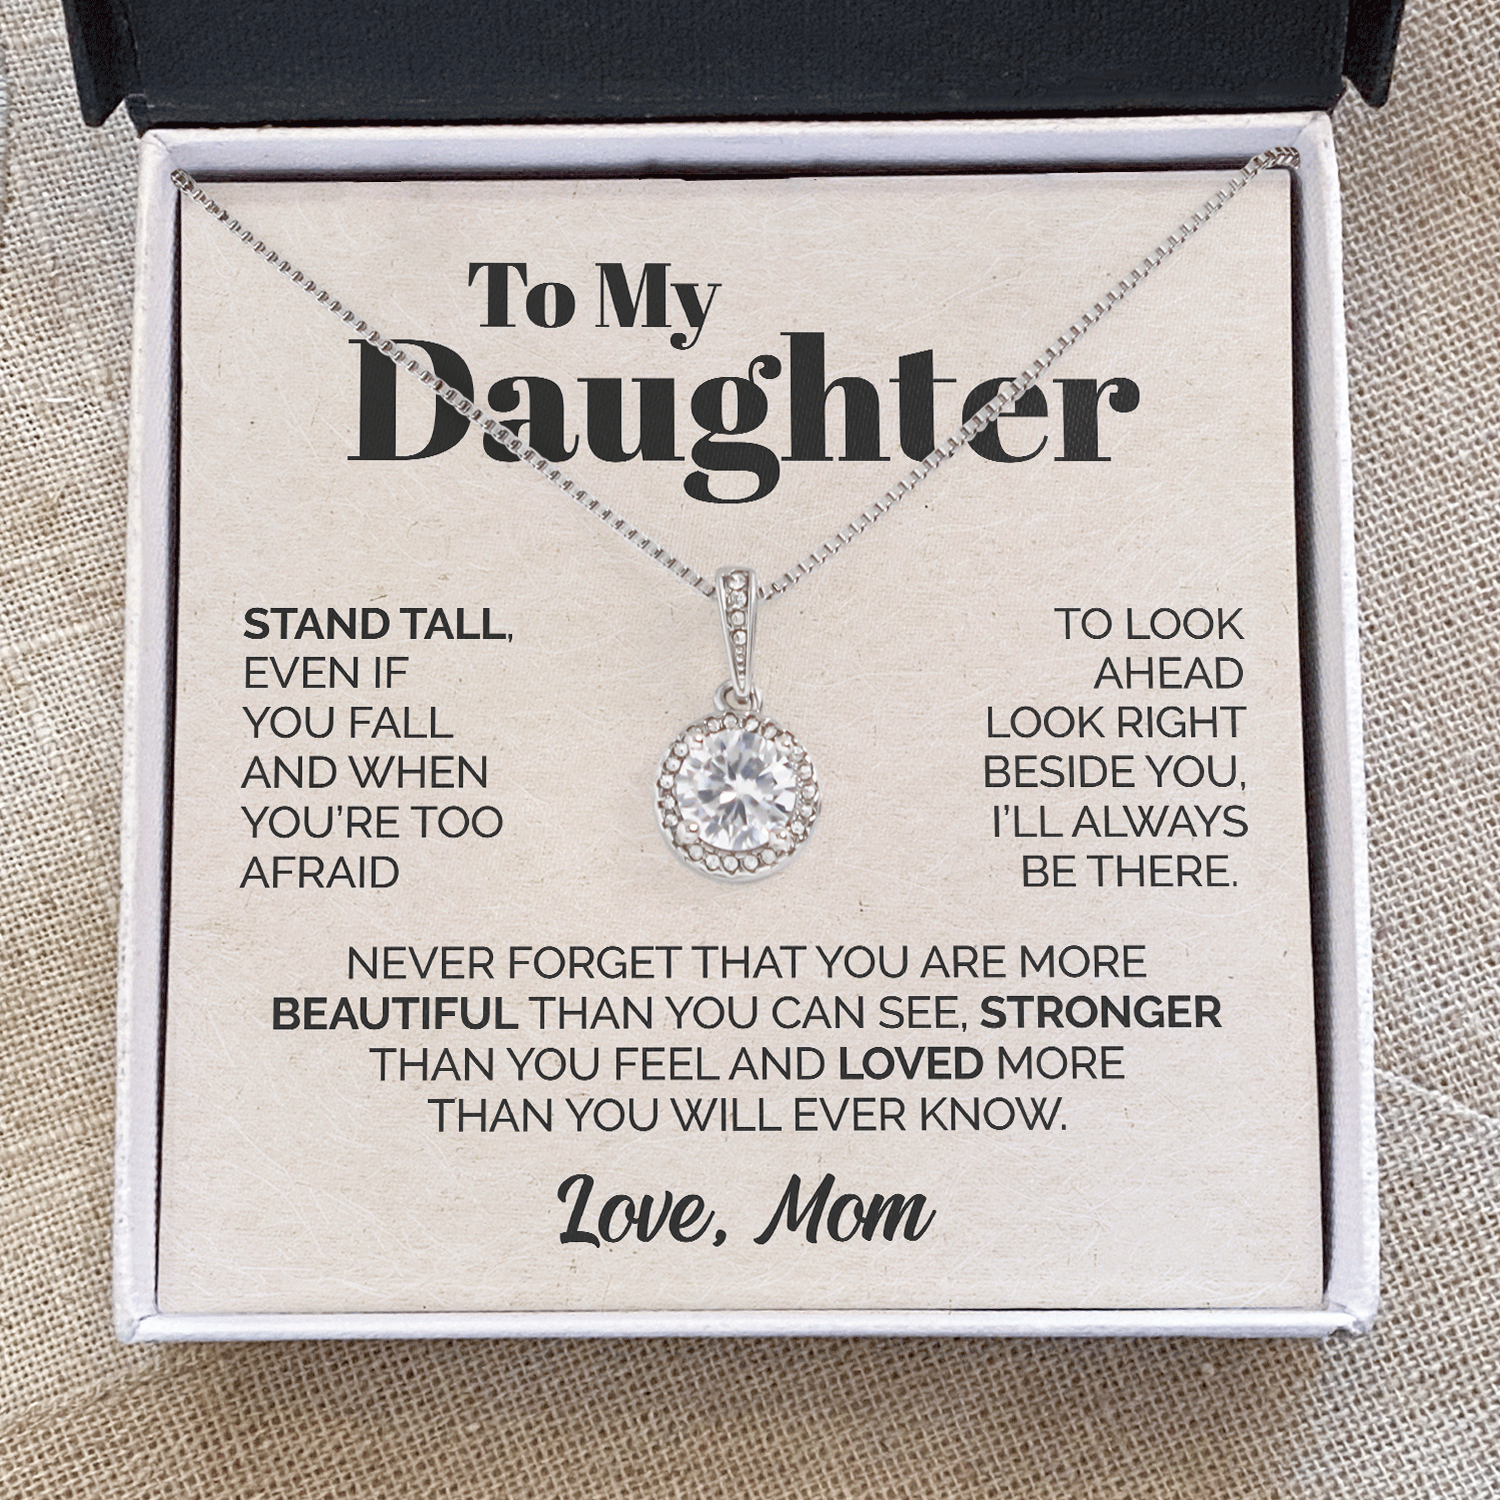 ShineOn Fulfillment Jewelry Standard Box To My Daughter - Stand Tall Even If You Fall - Eternal Hope Necklace